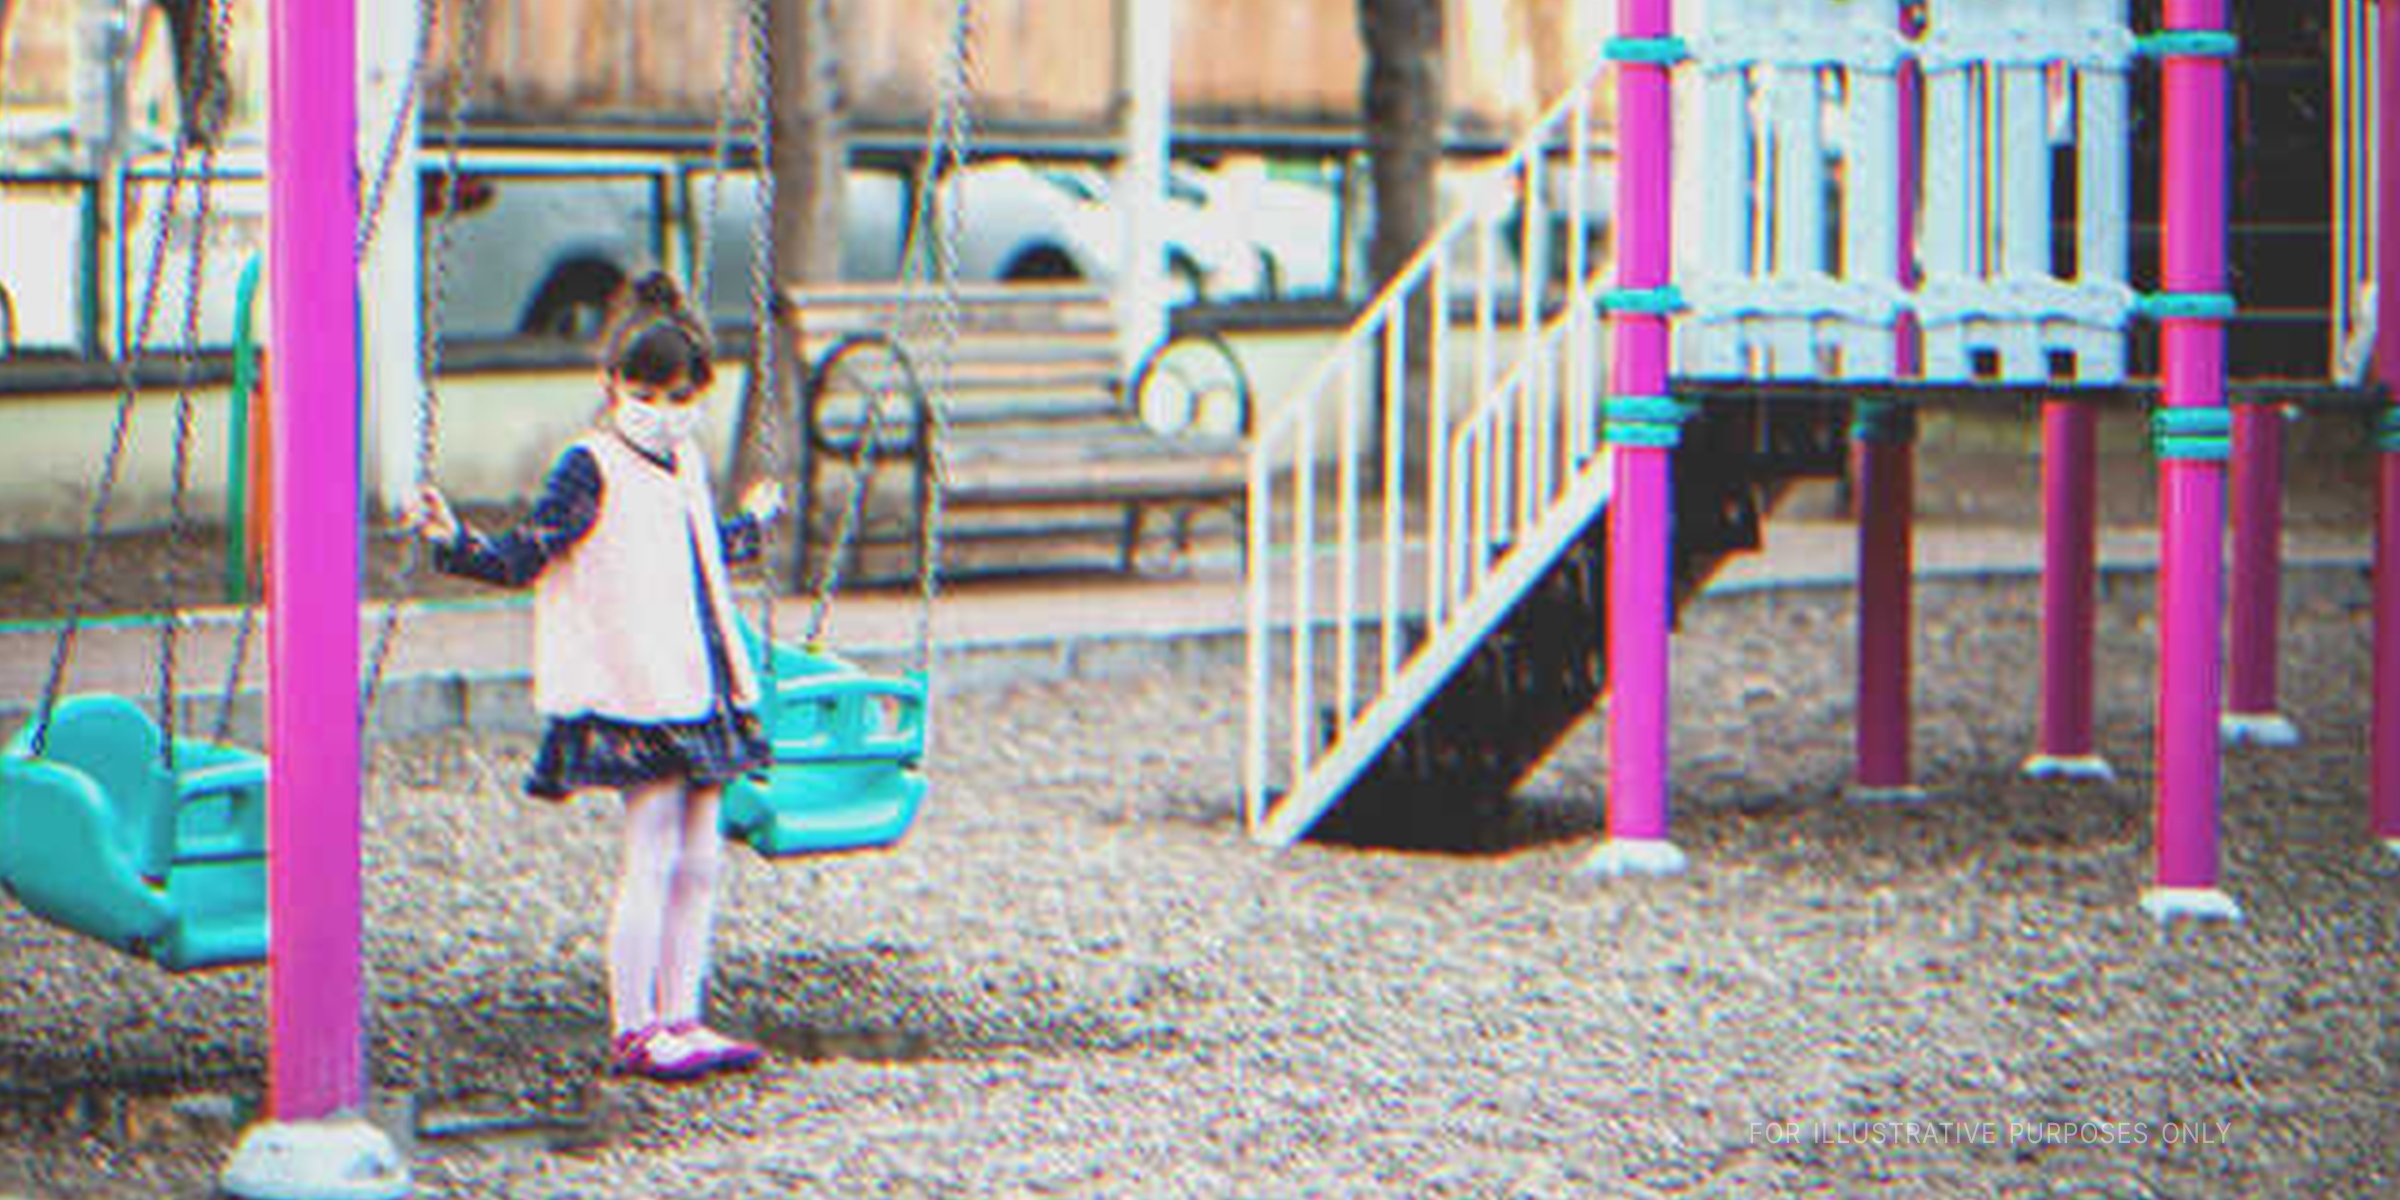 Little Girl By The Swing In a Playground | Source: Getty Images